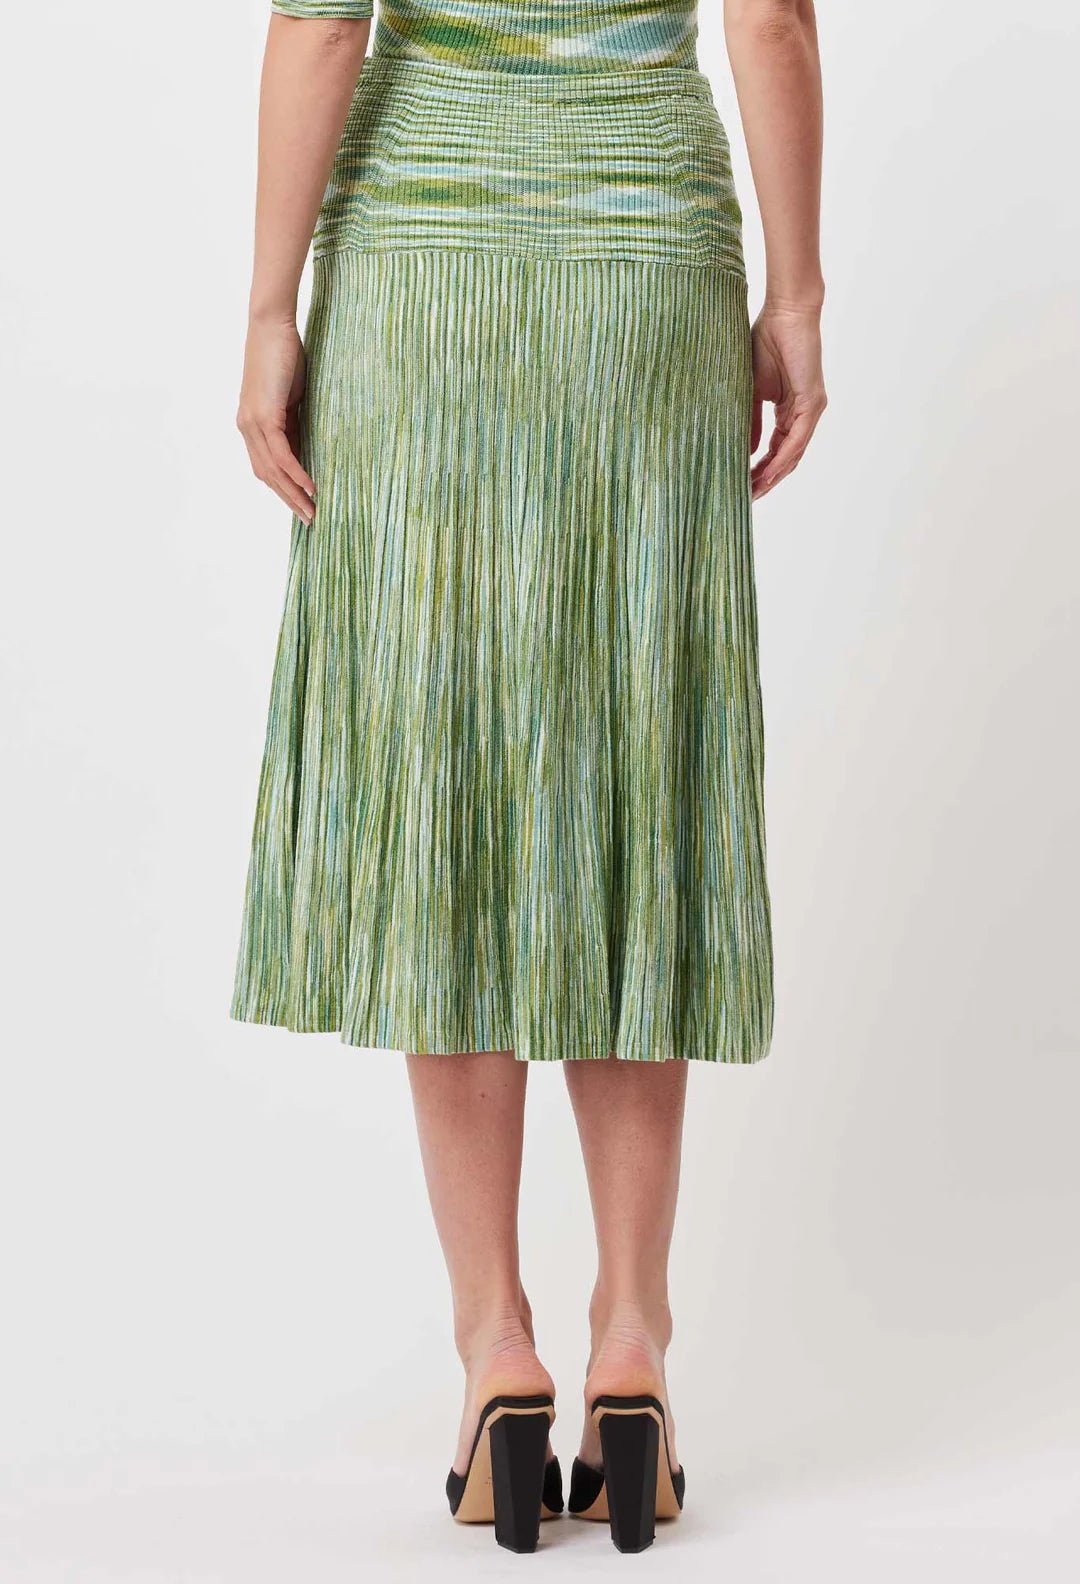 Shop Transit Rayon Knit Skirt │ Jade Space-Dyed - ONCEWAS